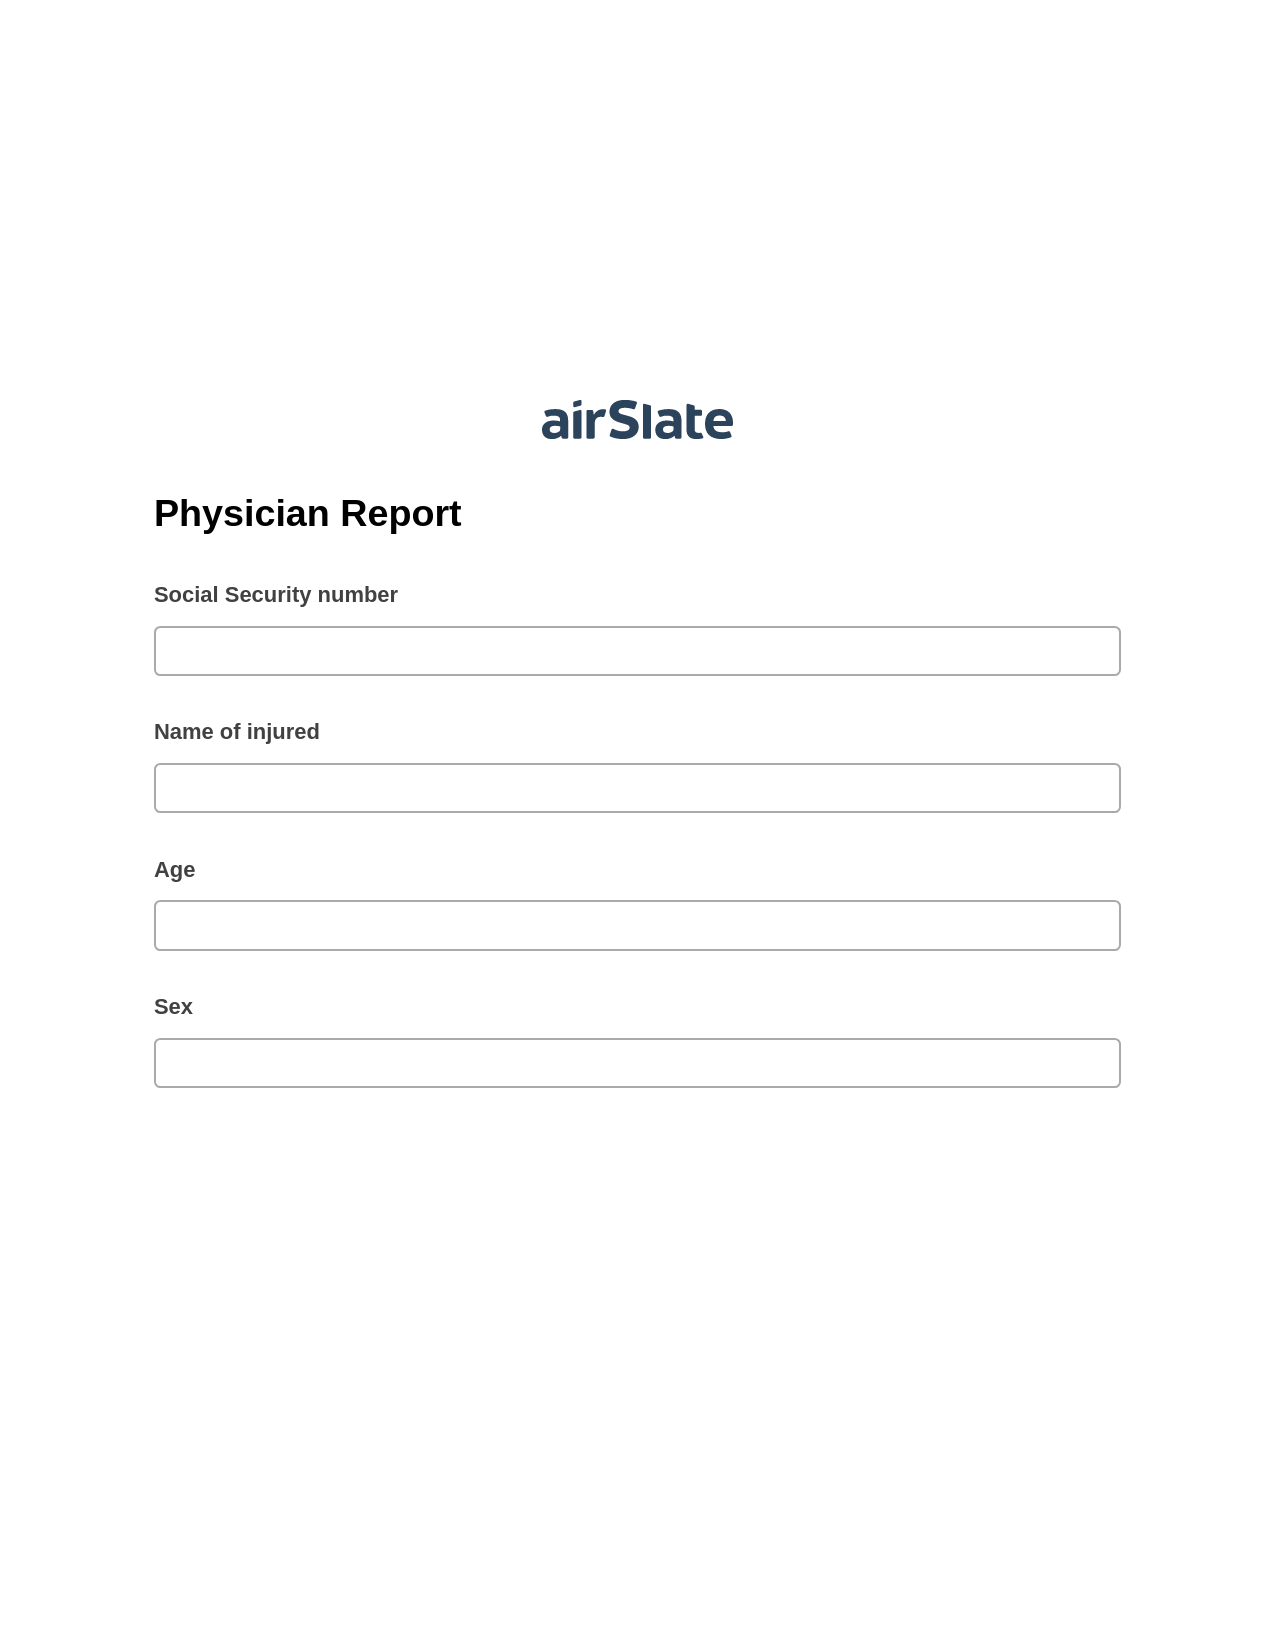 Physician Report Pre-fill from MS Dynamics 365 Records, Lock the Slate Bot, Post-finish Document Bot